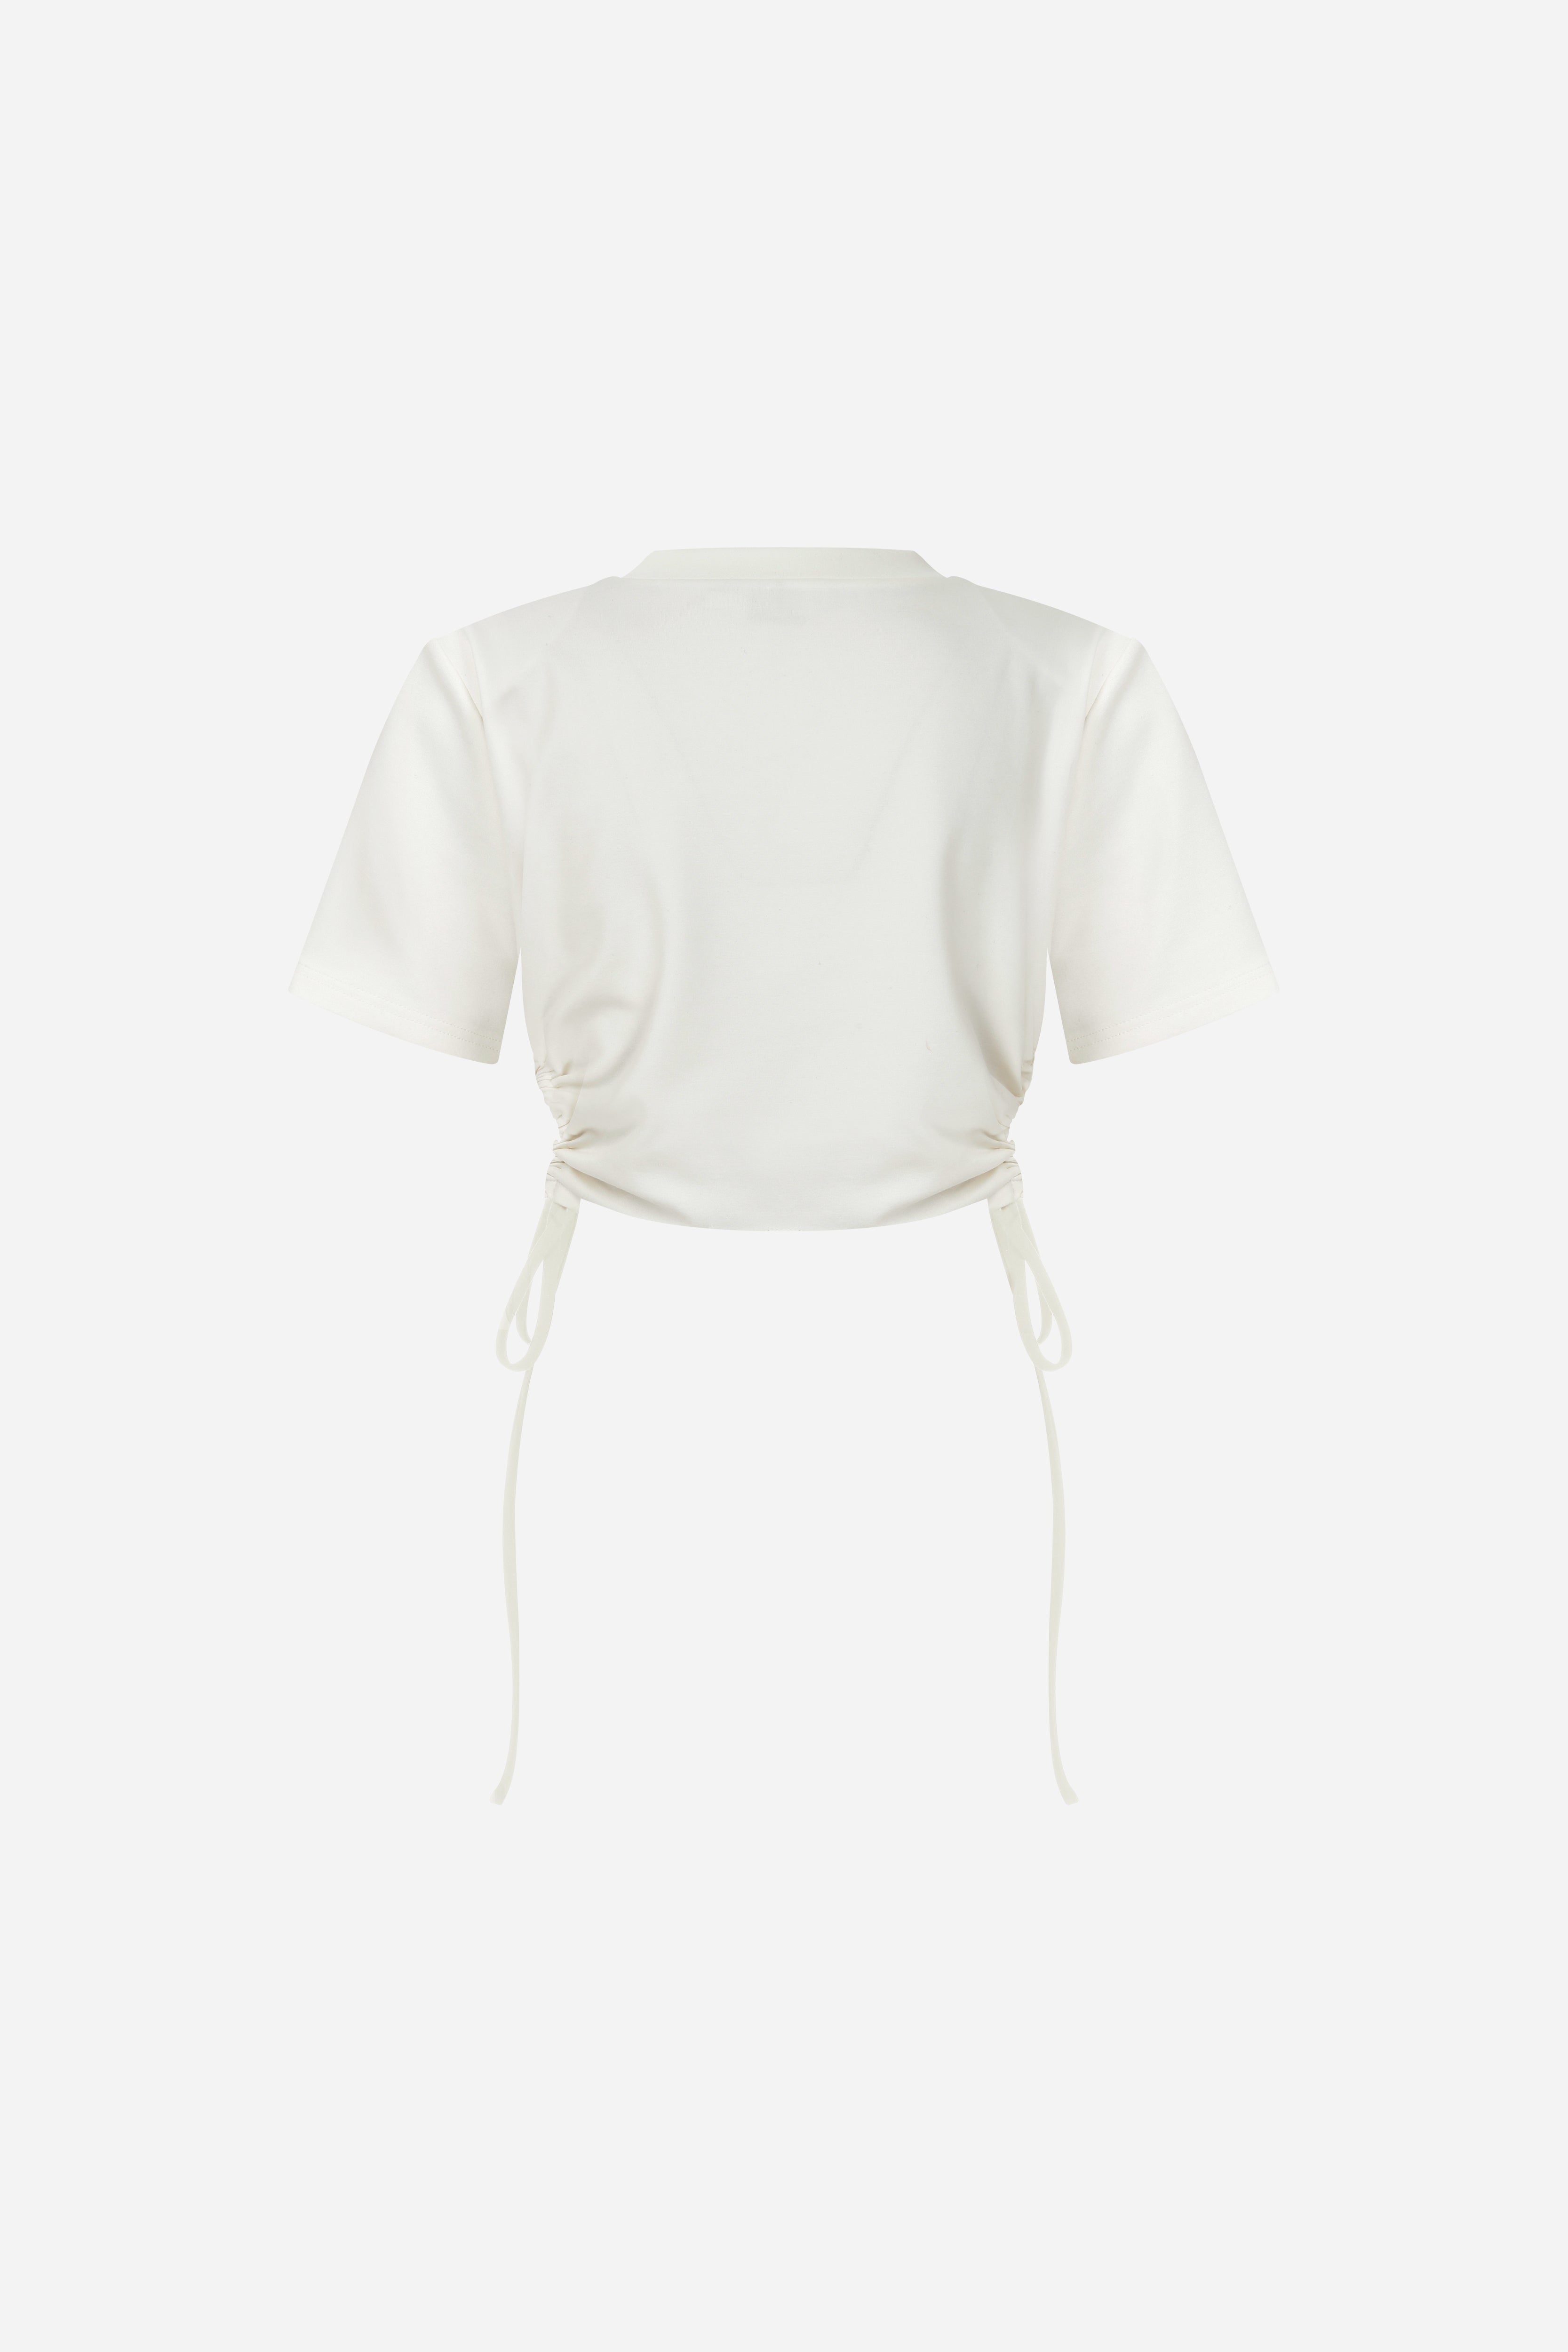 Viva - Cropped Tshirt With Side Detail